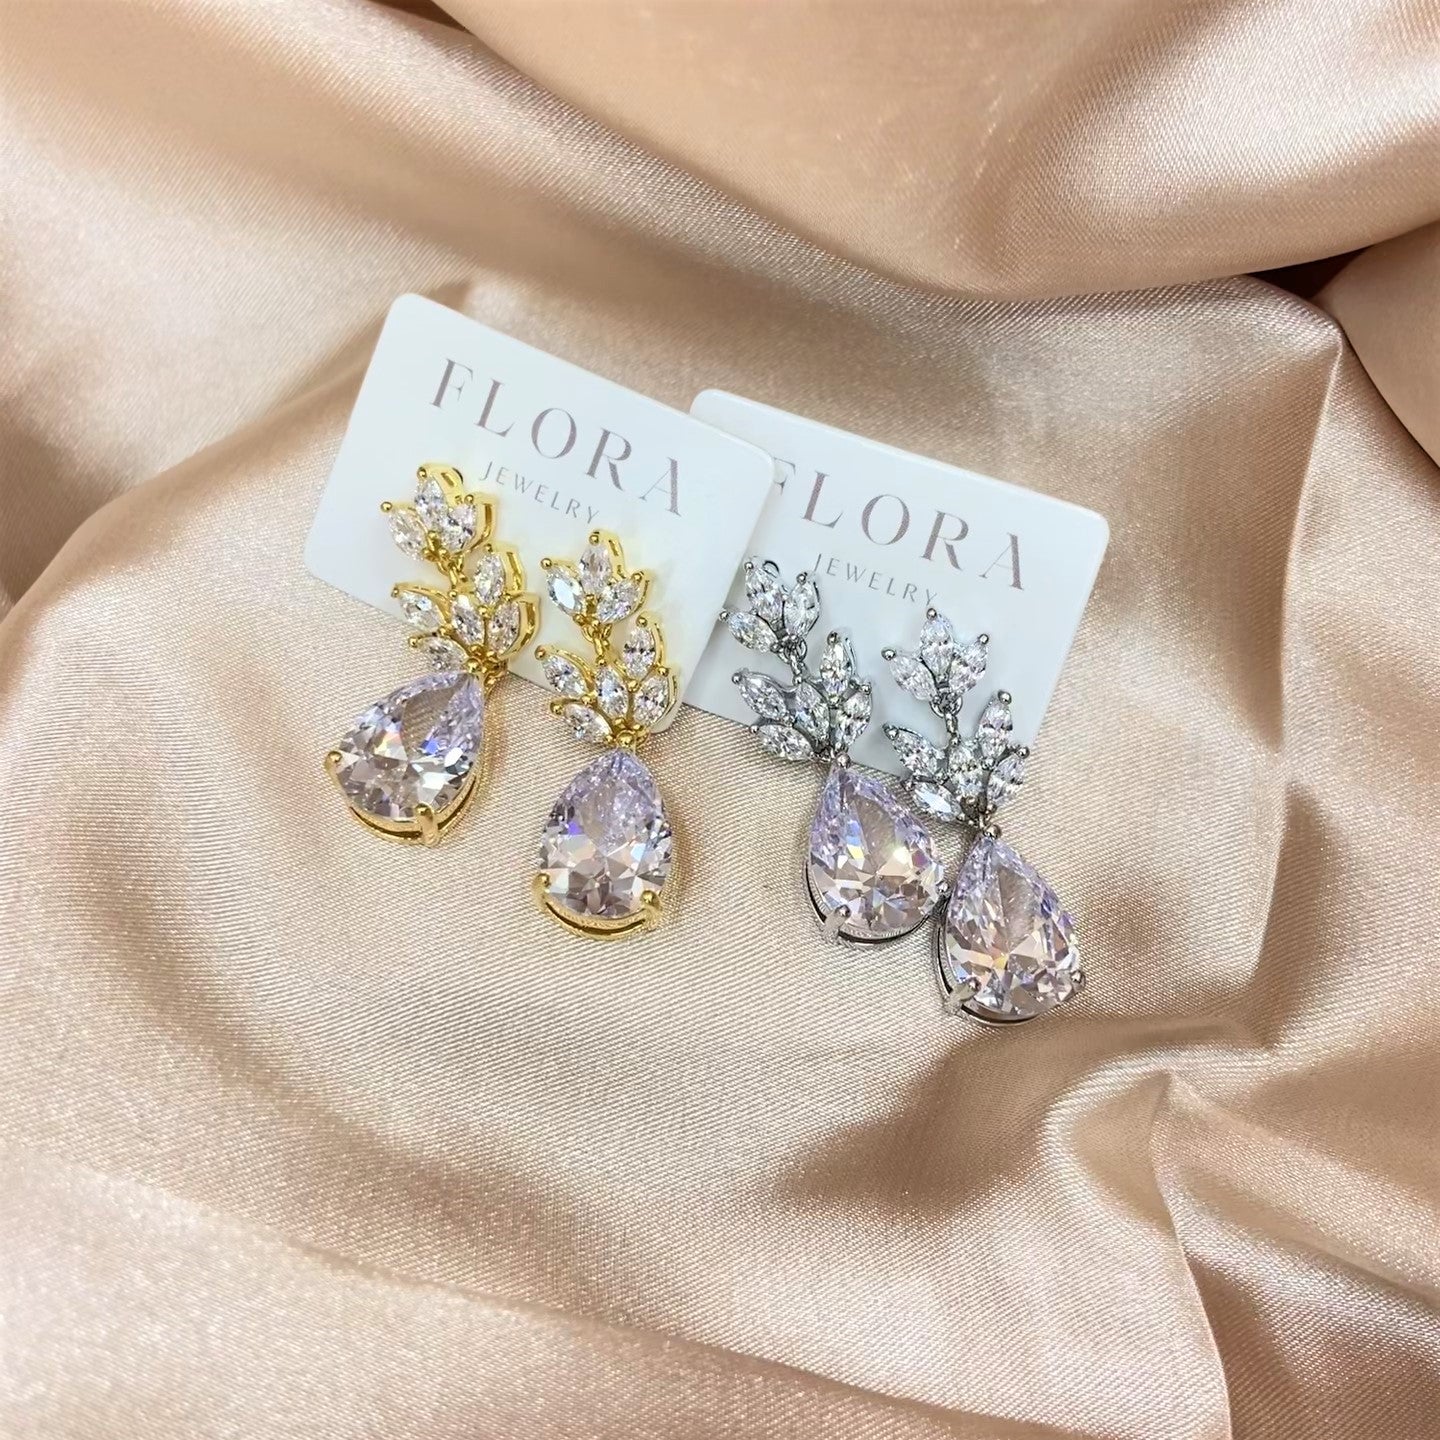 Gold and Silver earrings for bridal party